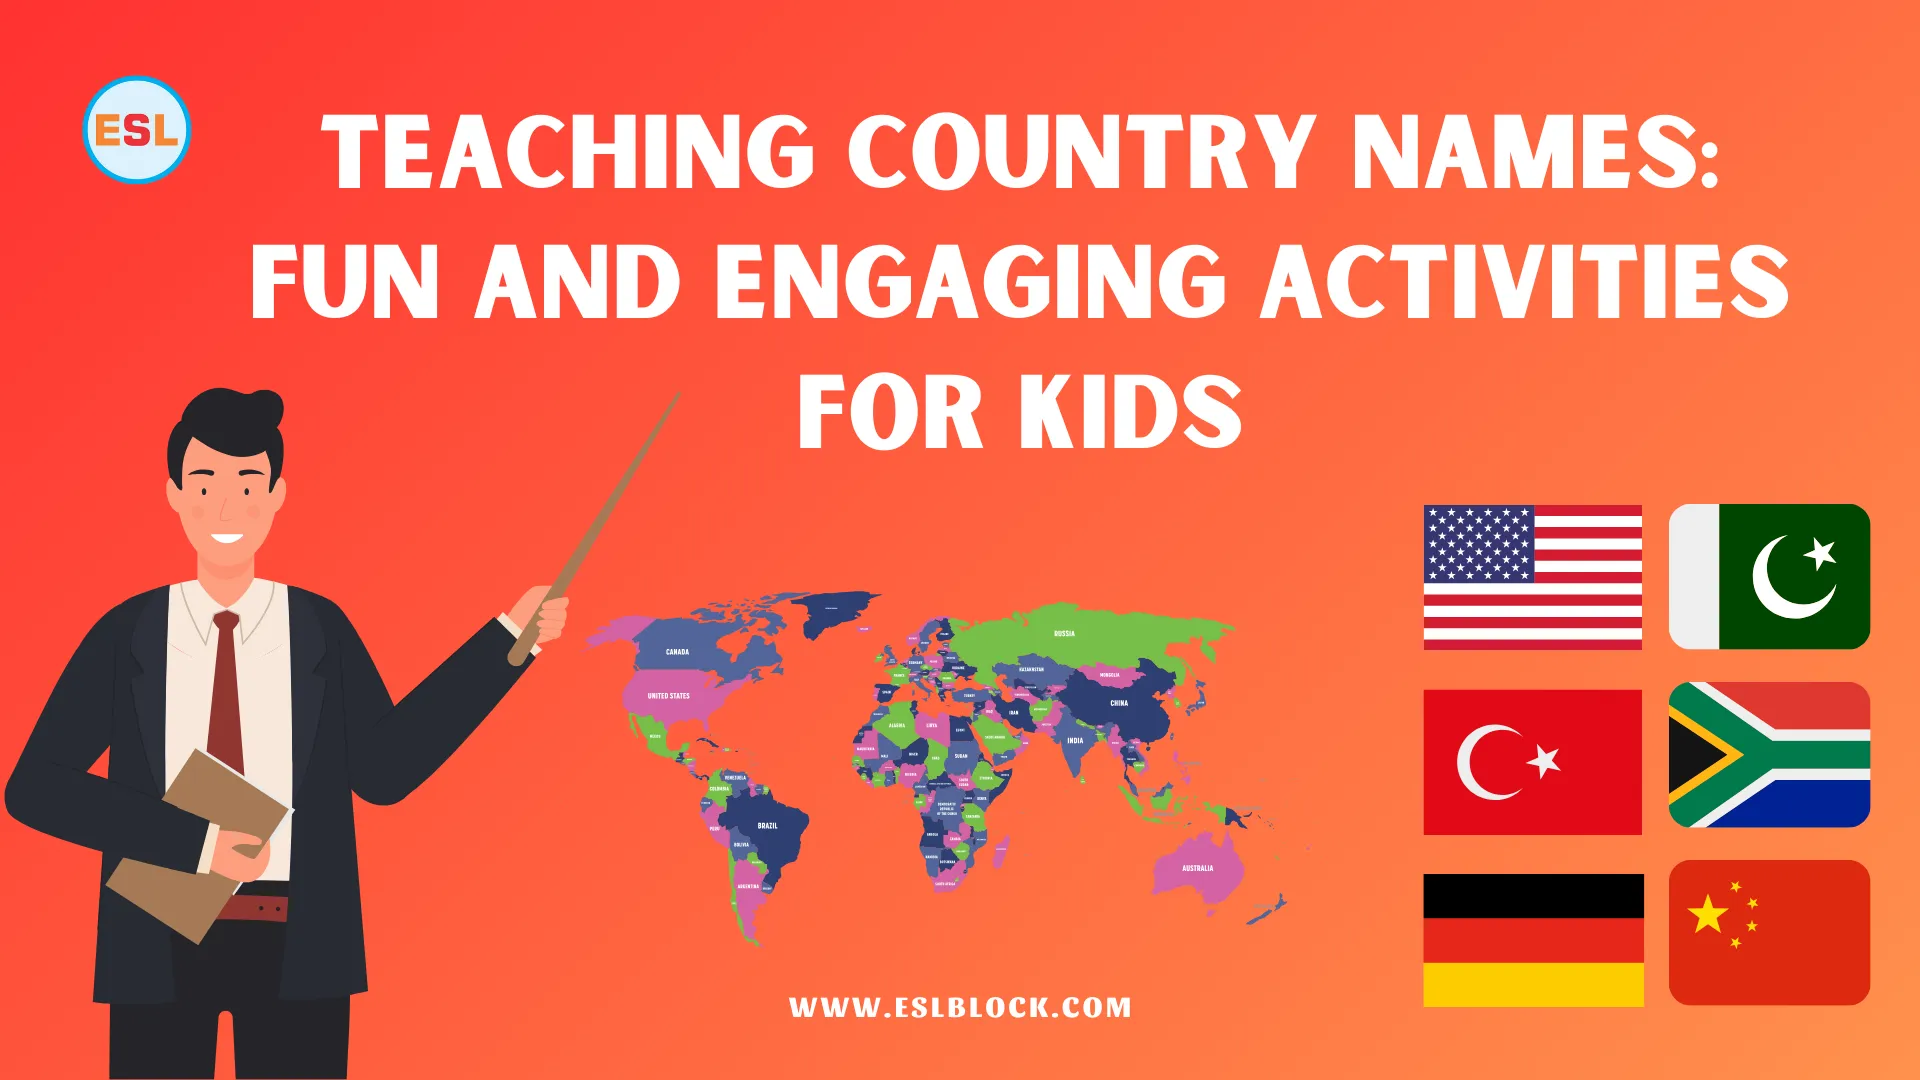 Teaching Country Names Fun and Engaging Activities for Kids